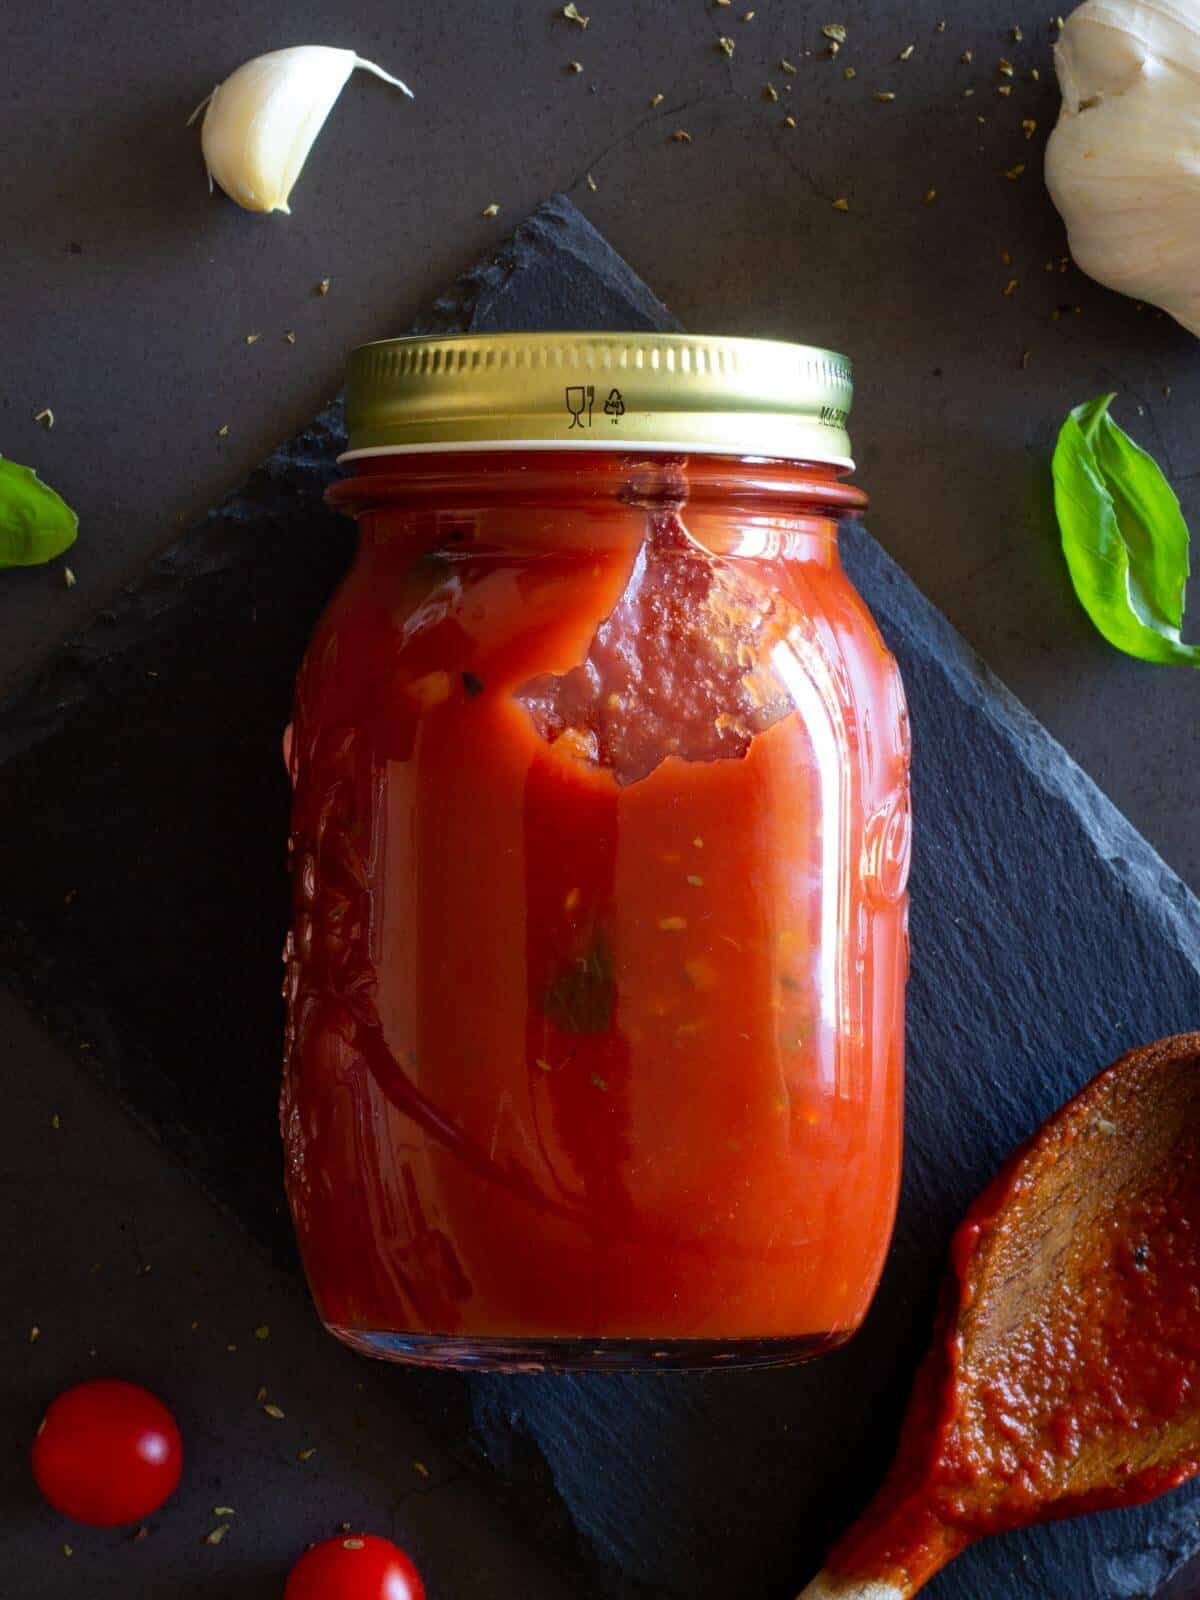 marinara sauce is used in pasta and marinara pizza, one of the things to try while you eat in Italy given the high quality of their tomatoes